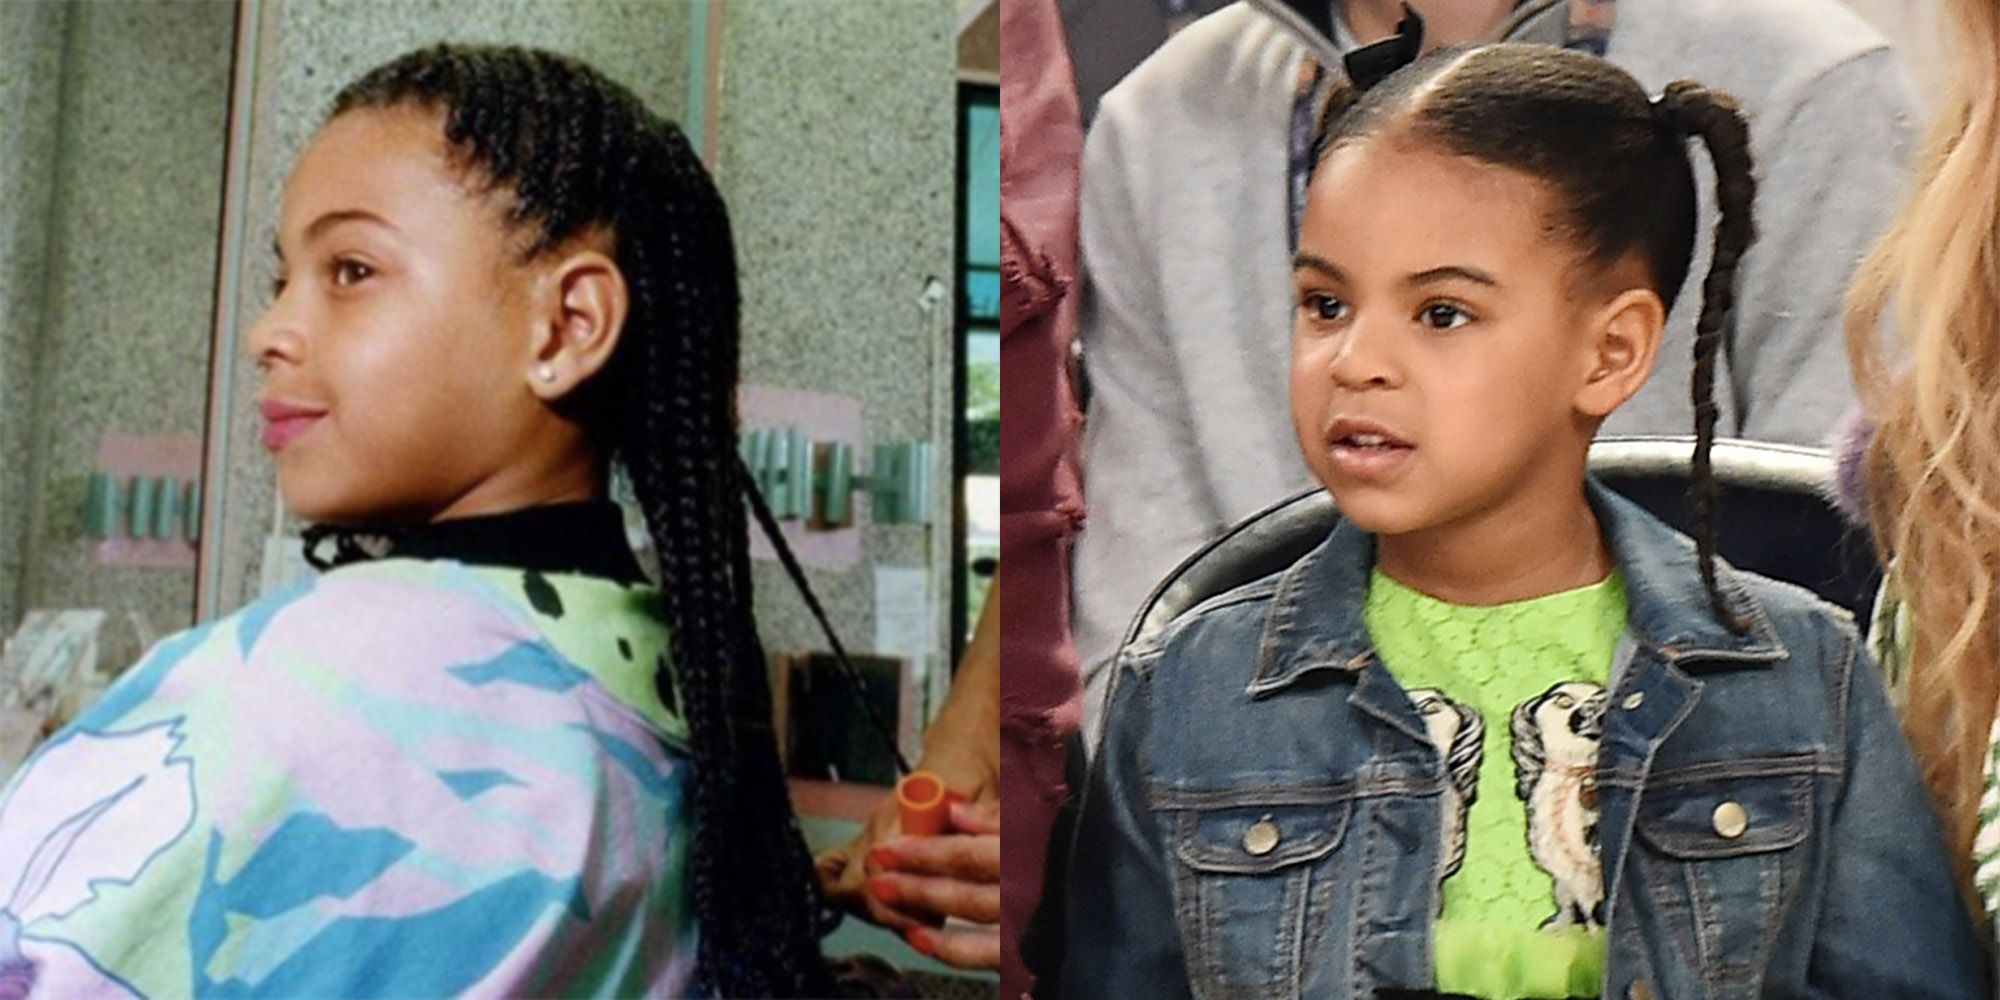 beyonce when she was a kid